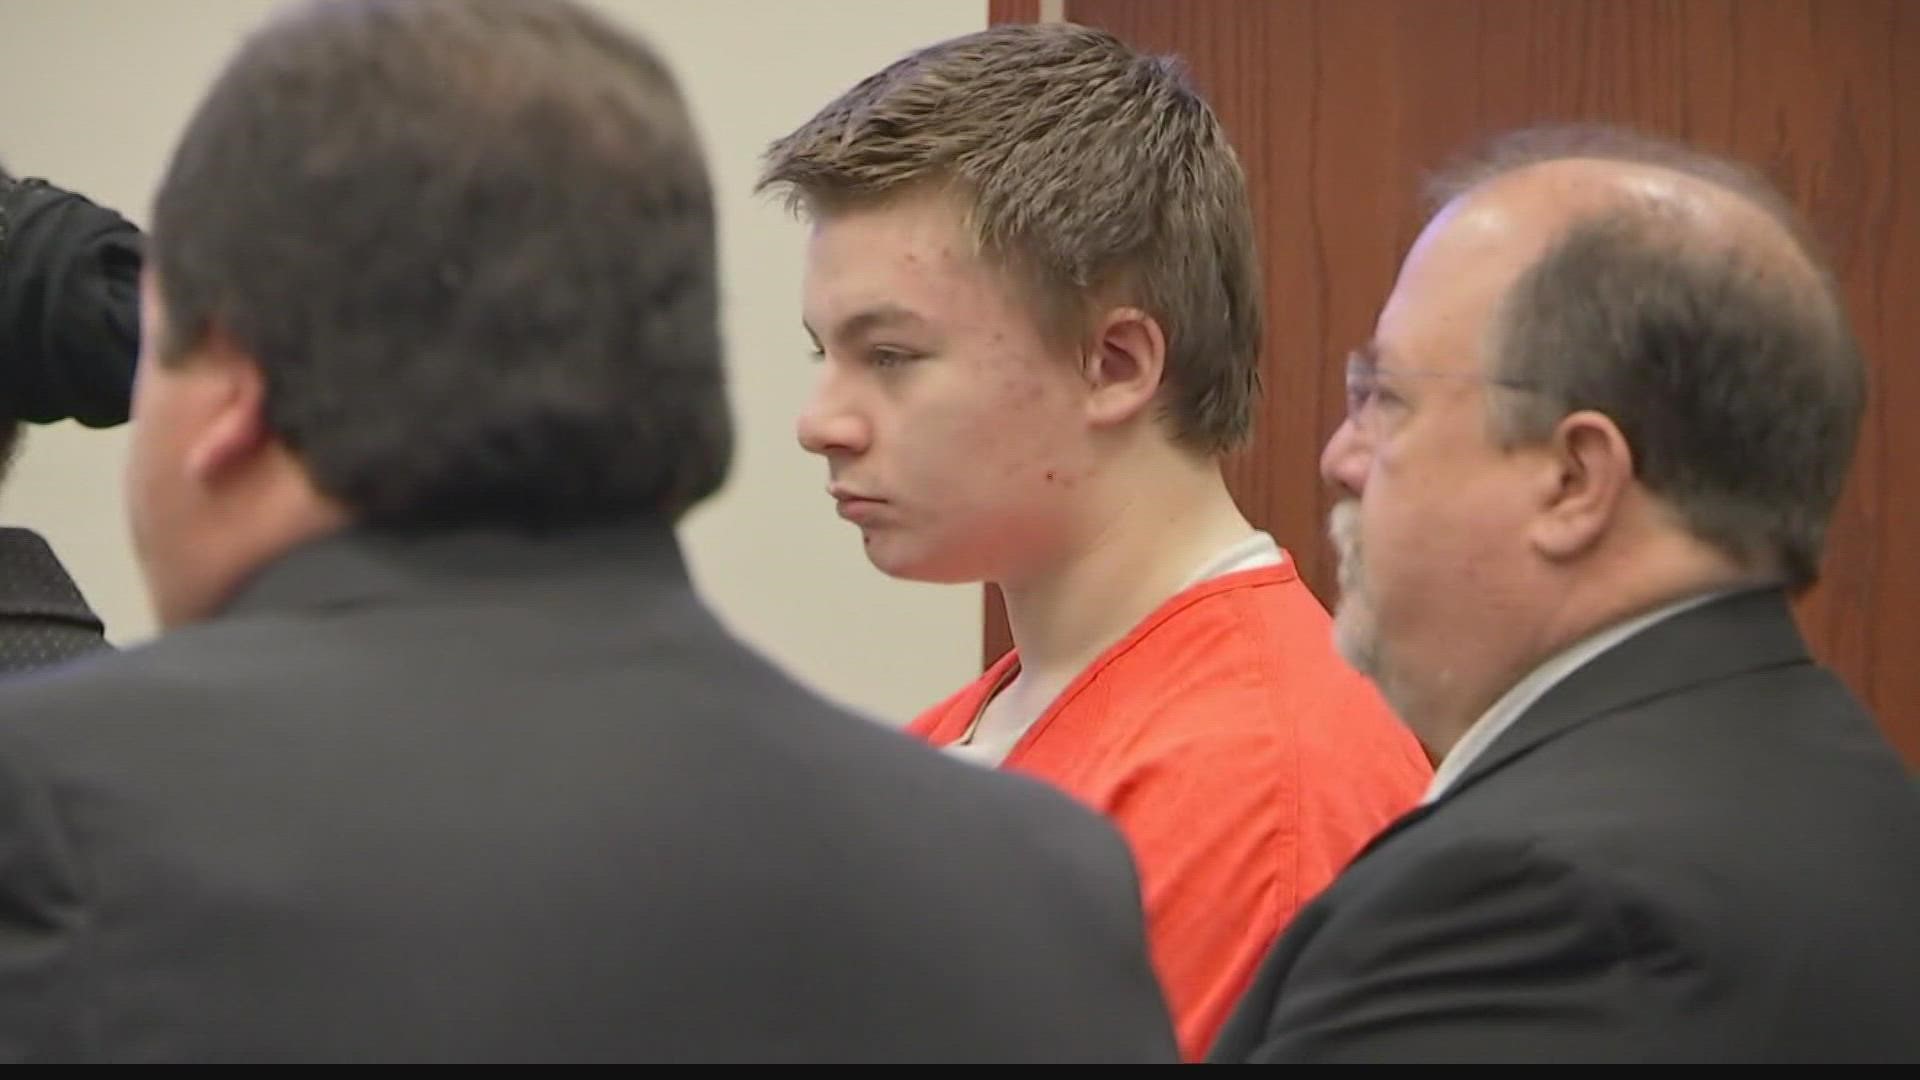 The judge heard the motion this morning to delay Fucci's trial, which is scheduled to start in early November.